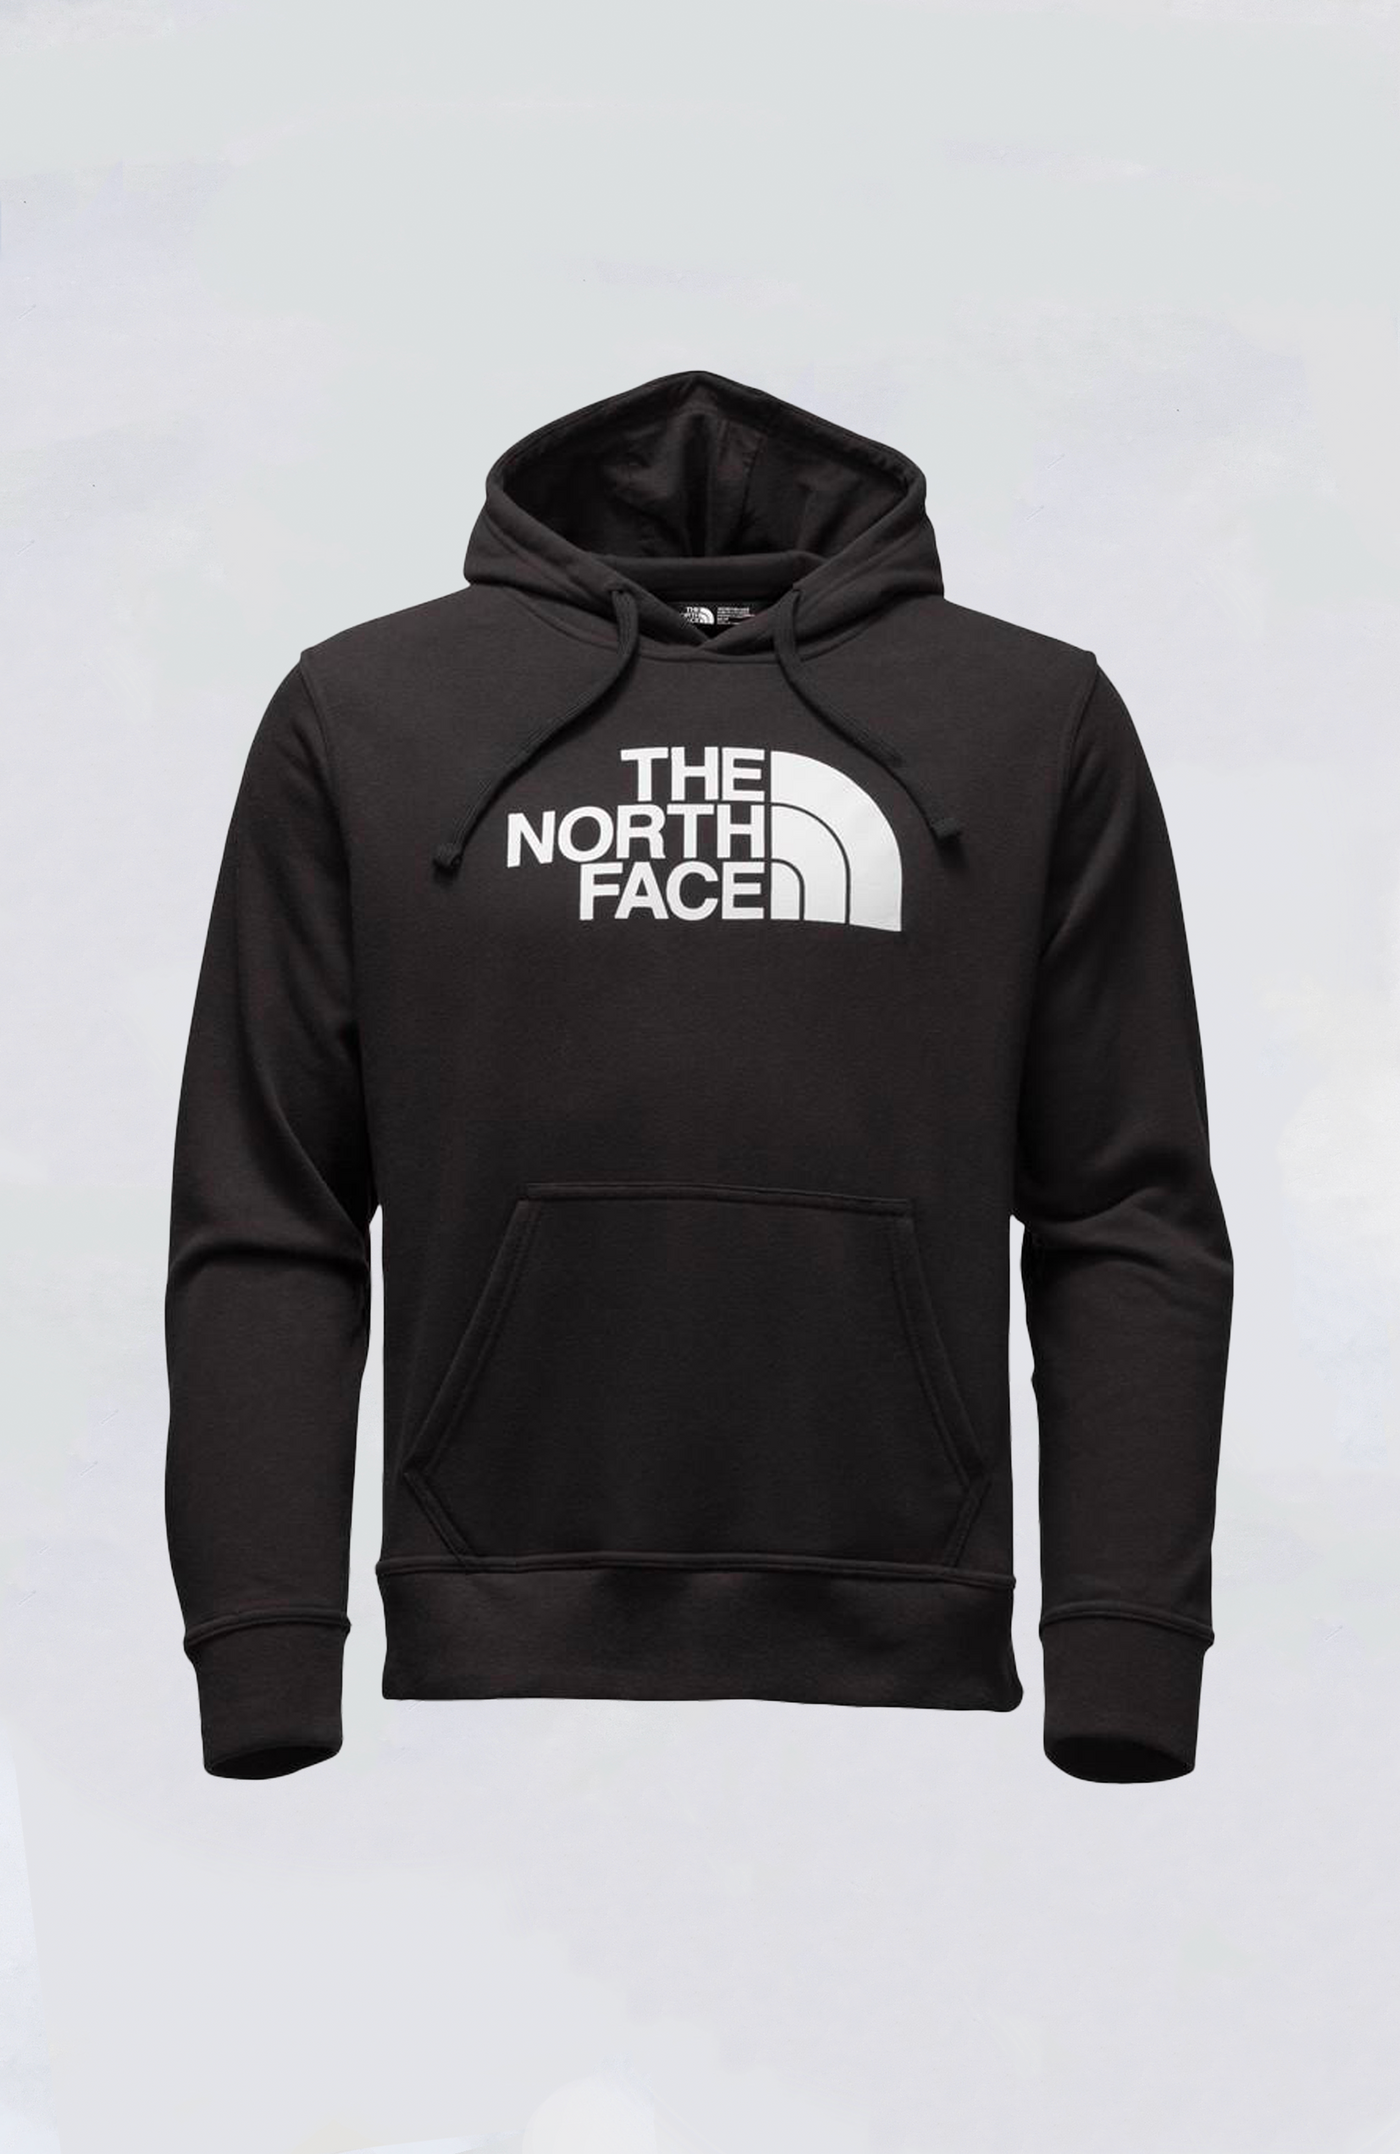 The North Face Pullover Hood - Men's Half Dome Pullover Hoodie